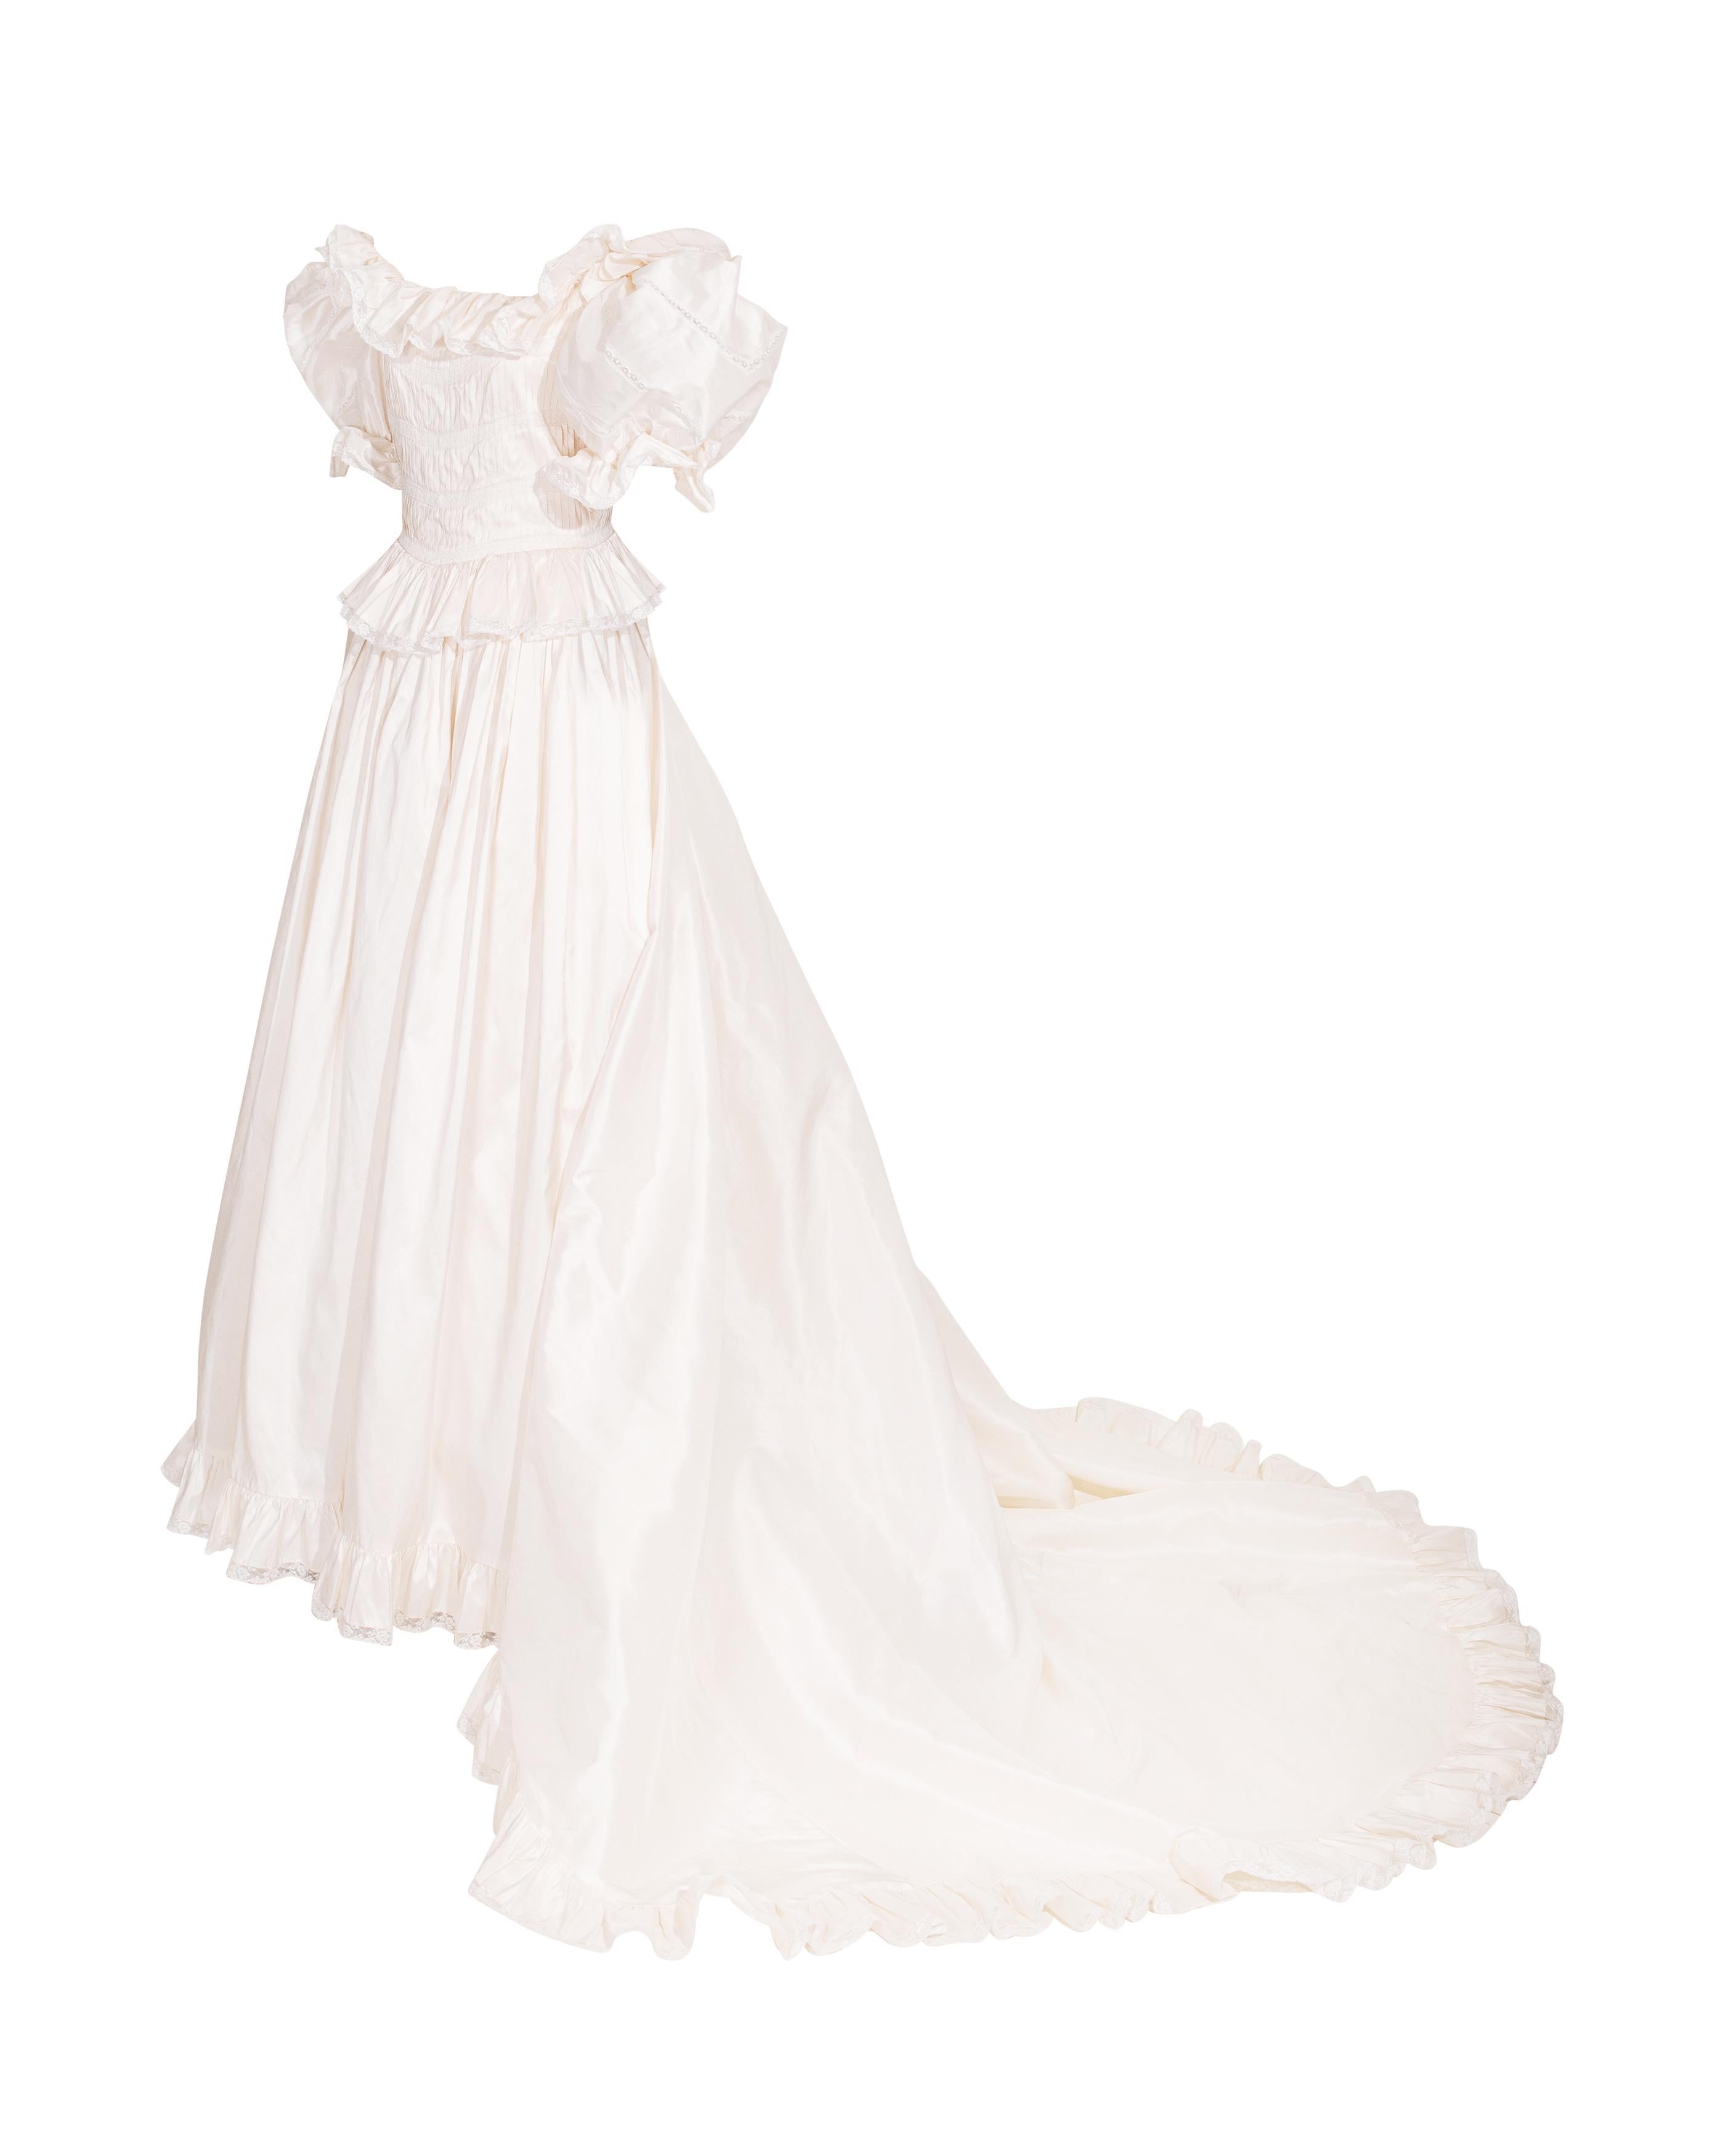 1970's Oscar de la Renta White Off-Shoulder Silk Ruffle Gown with Long Train In Good Condition For Sale In North Hollywood, CA